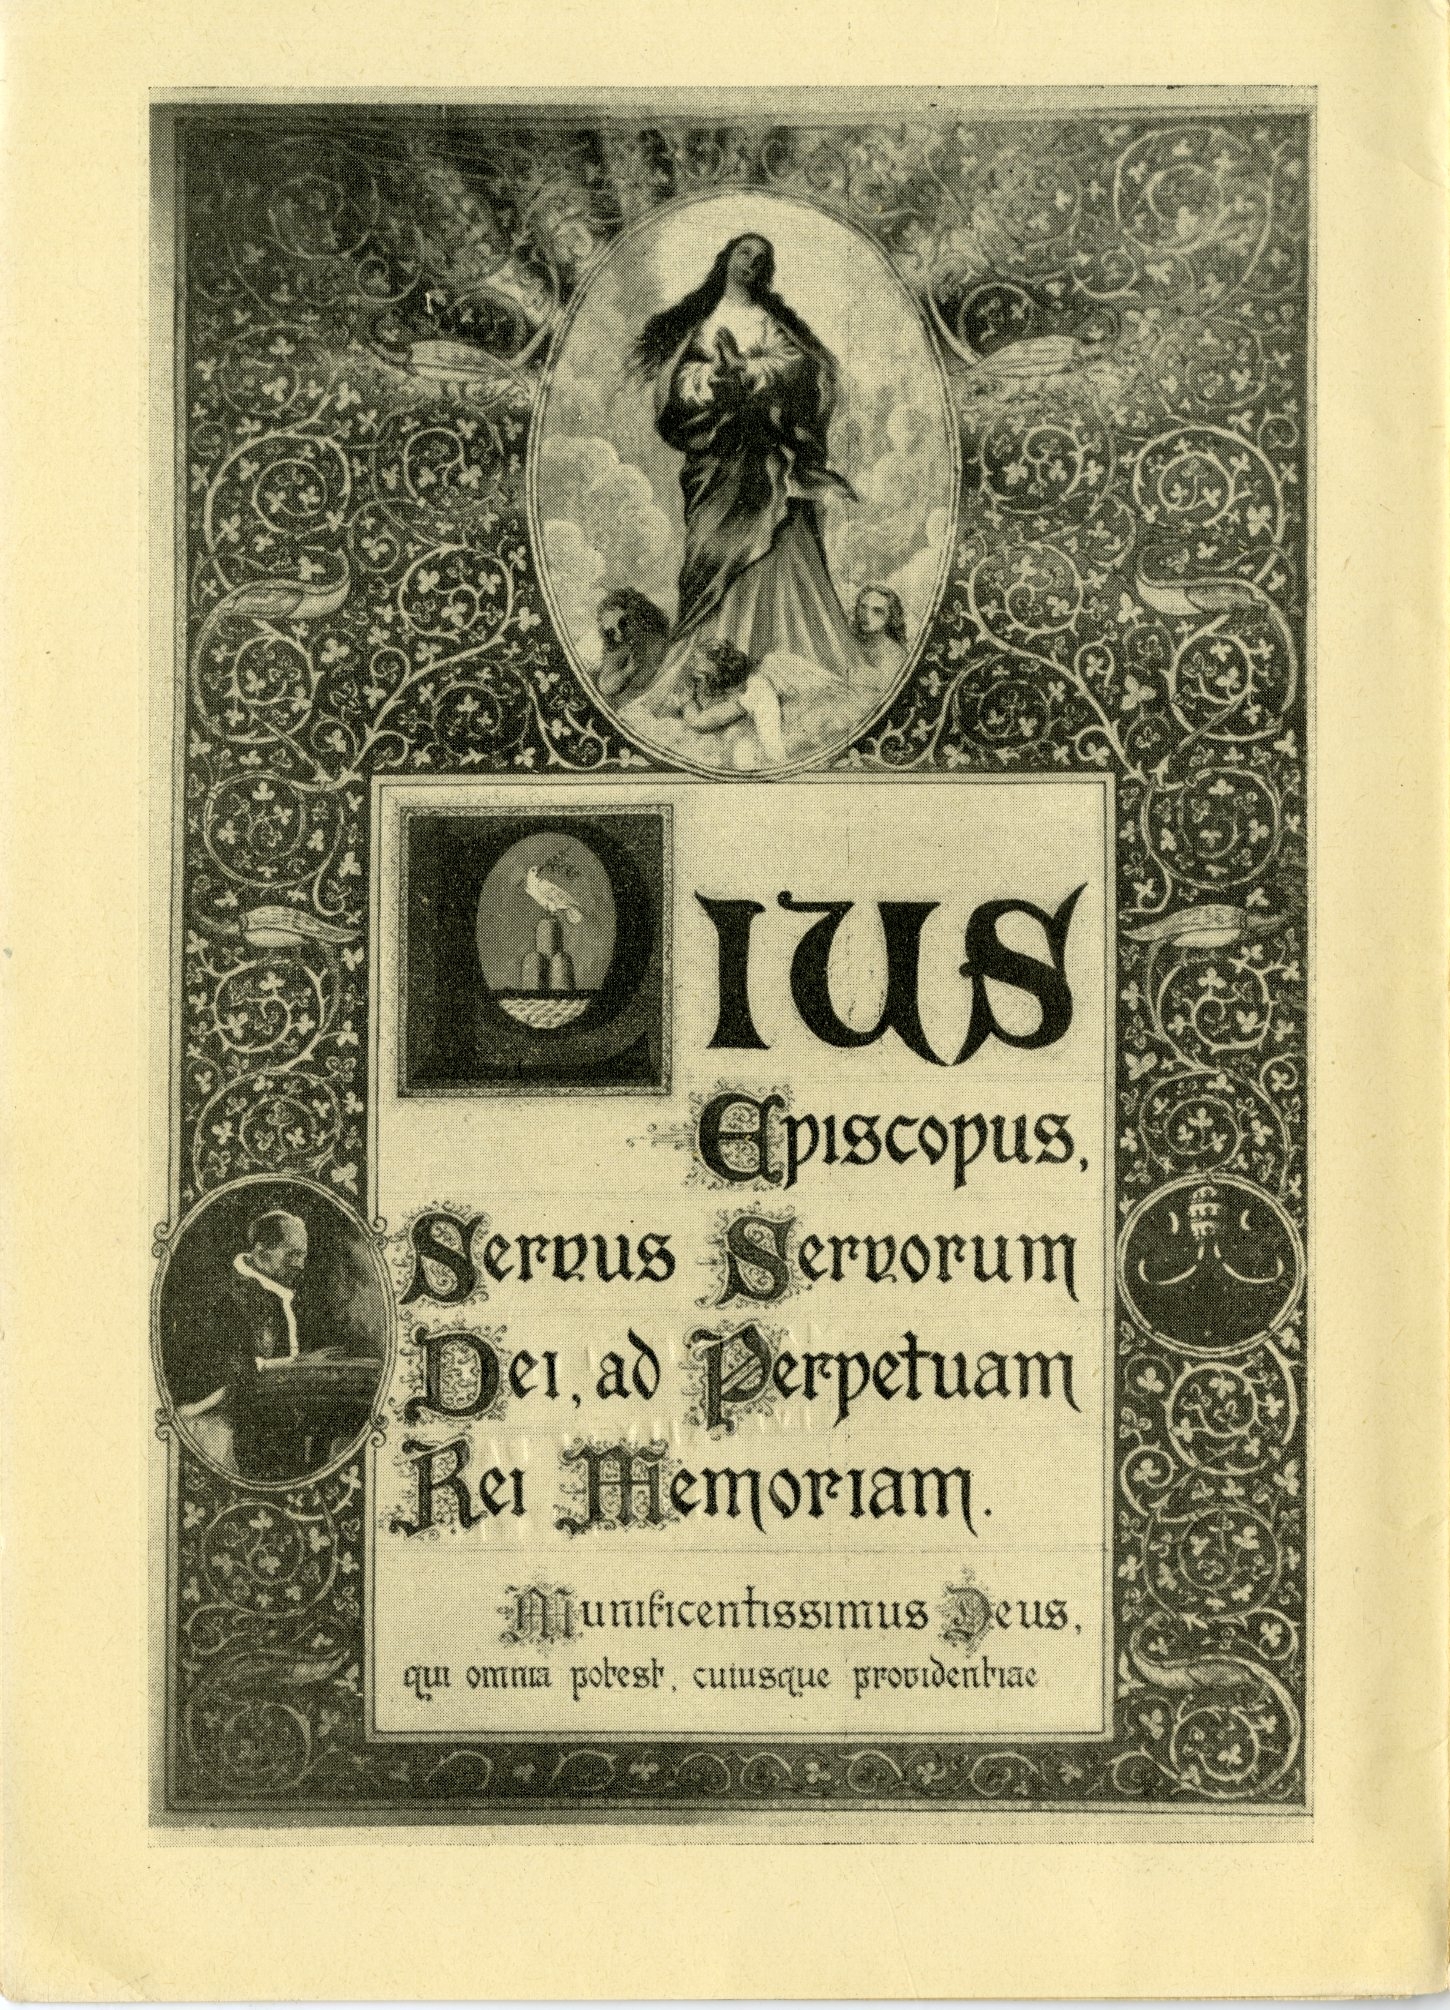 Title page from a miniature facsimile of Munificentissimus Deus, the Apostolic constitution written by Pope Pius XII declaring the Assumption of Mary as a dogma.